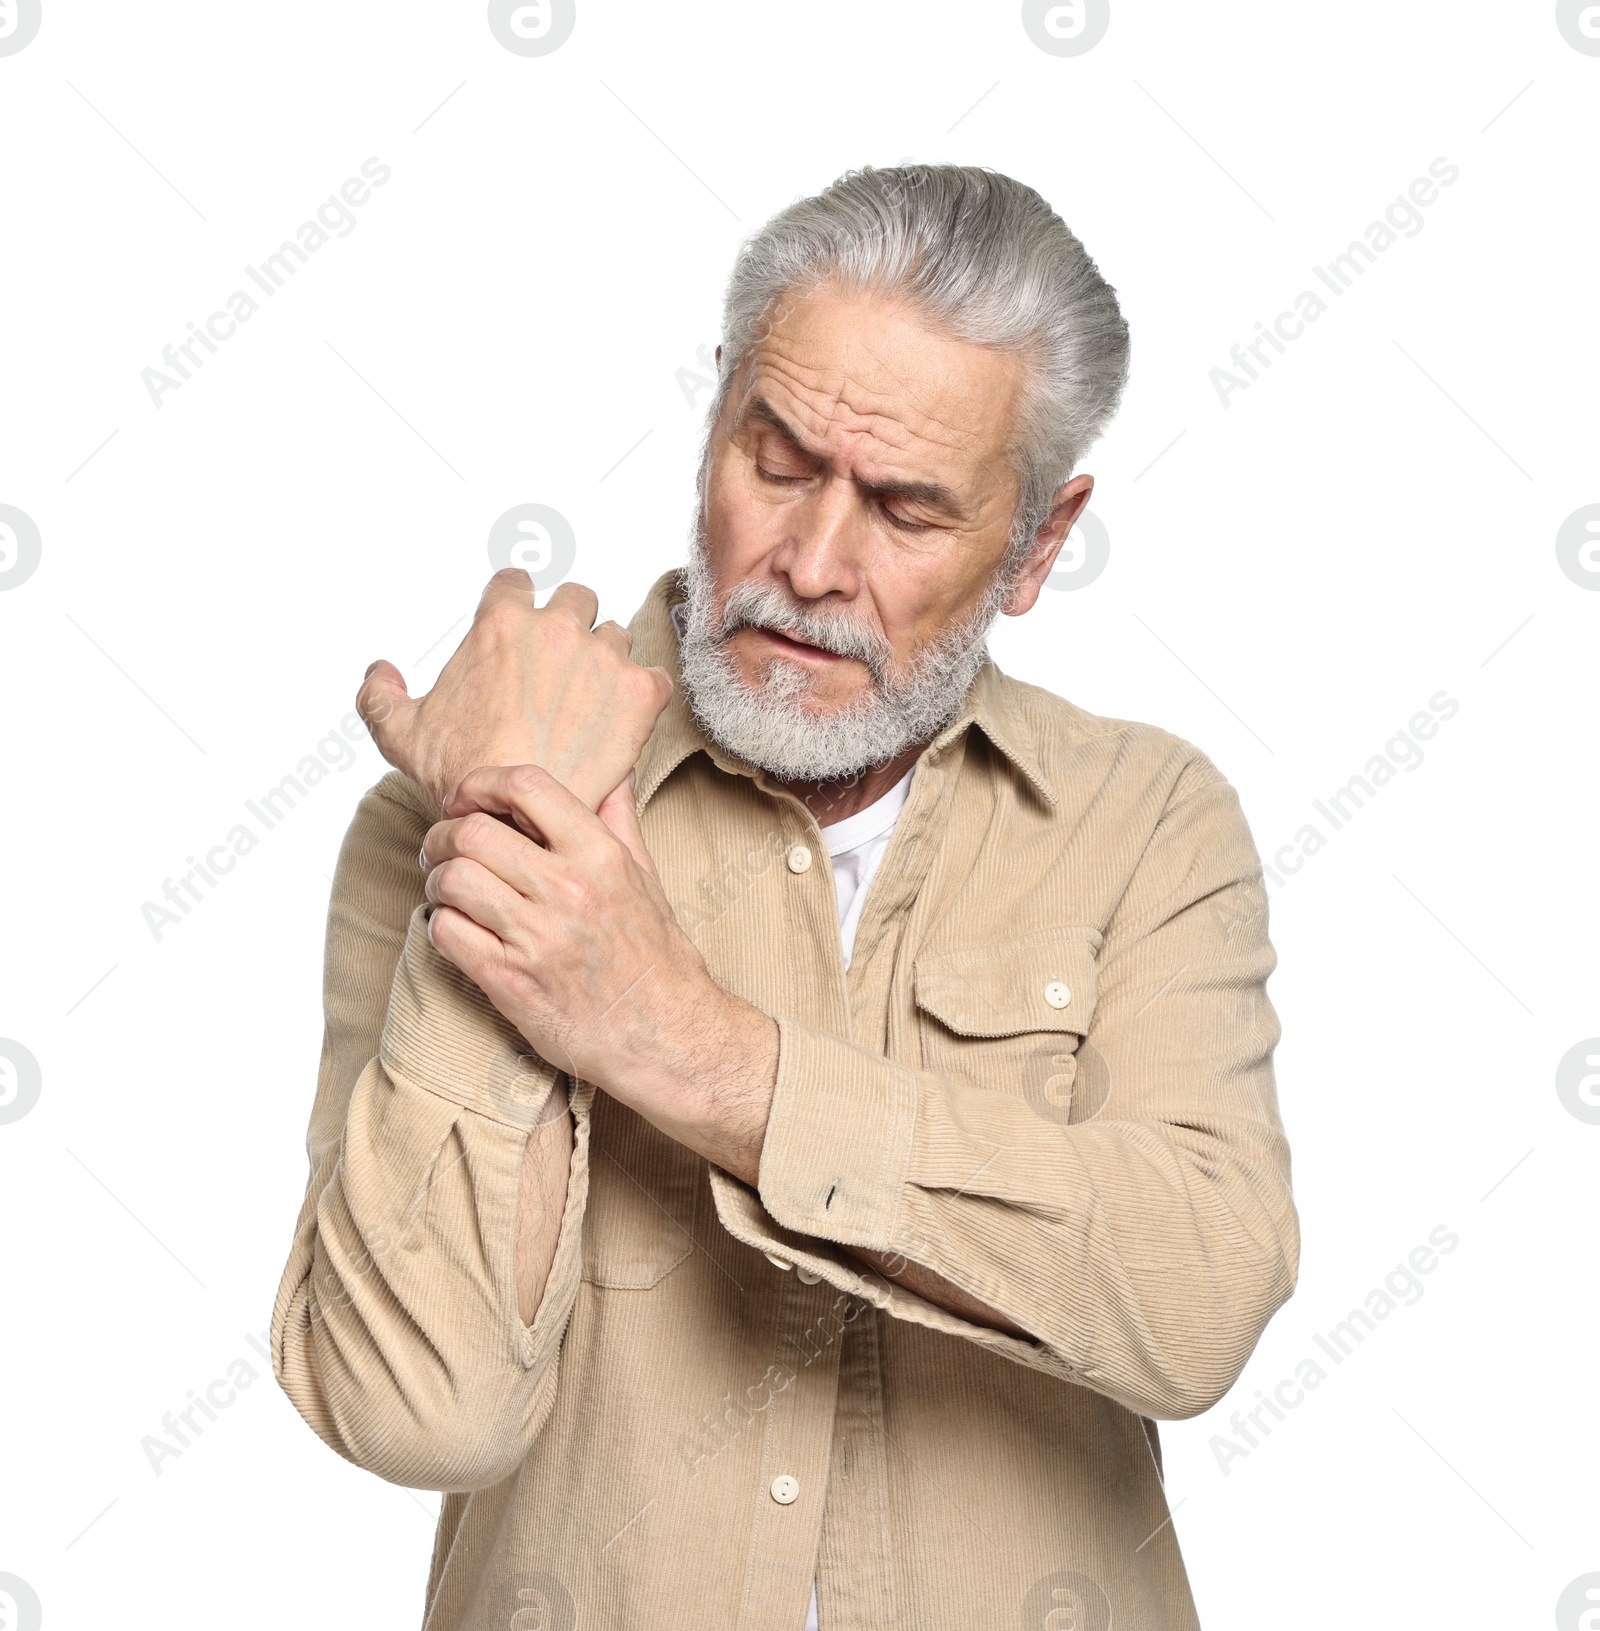 Photo of Arthritis symptoms. Man suffering from pain in wrist on white background